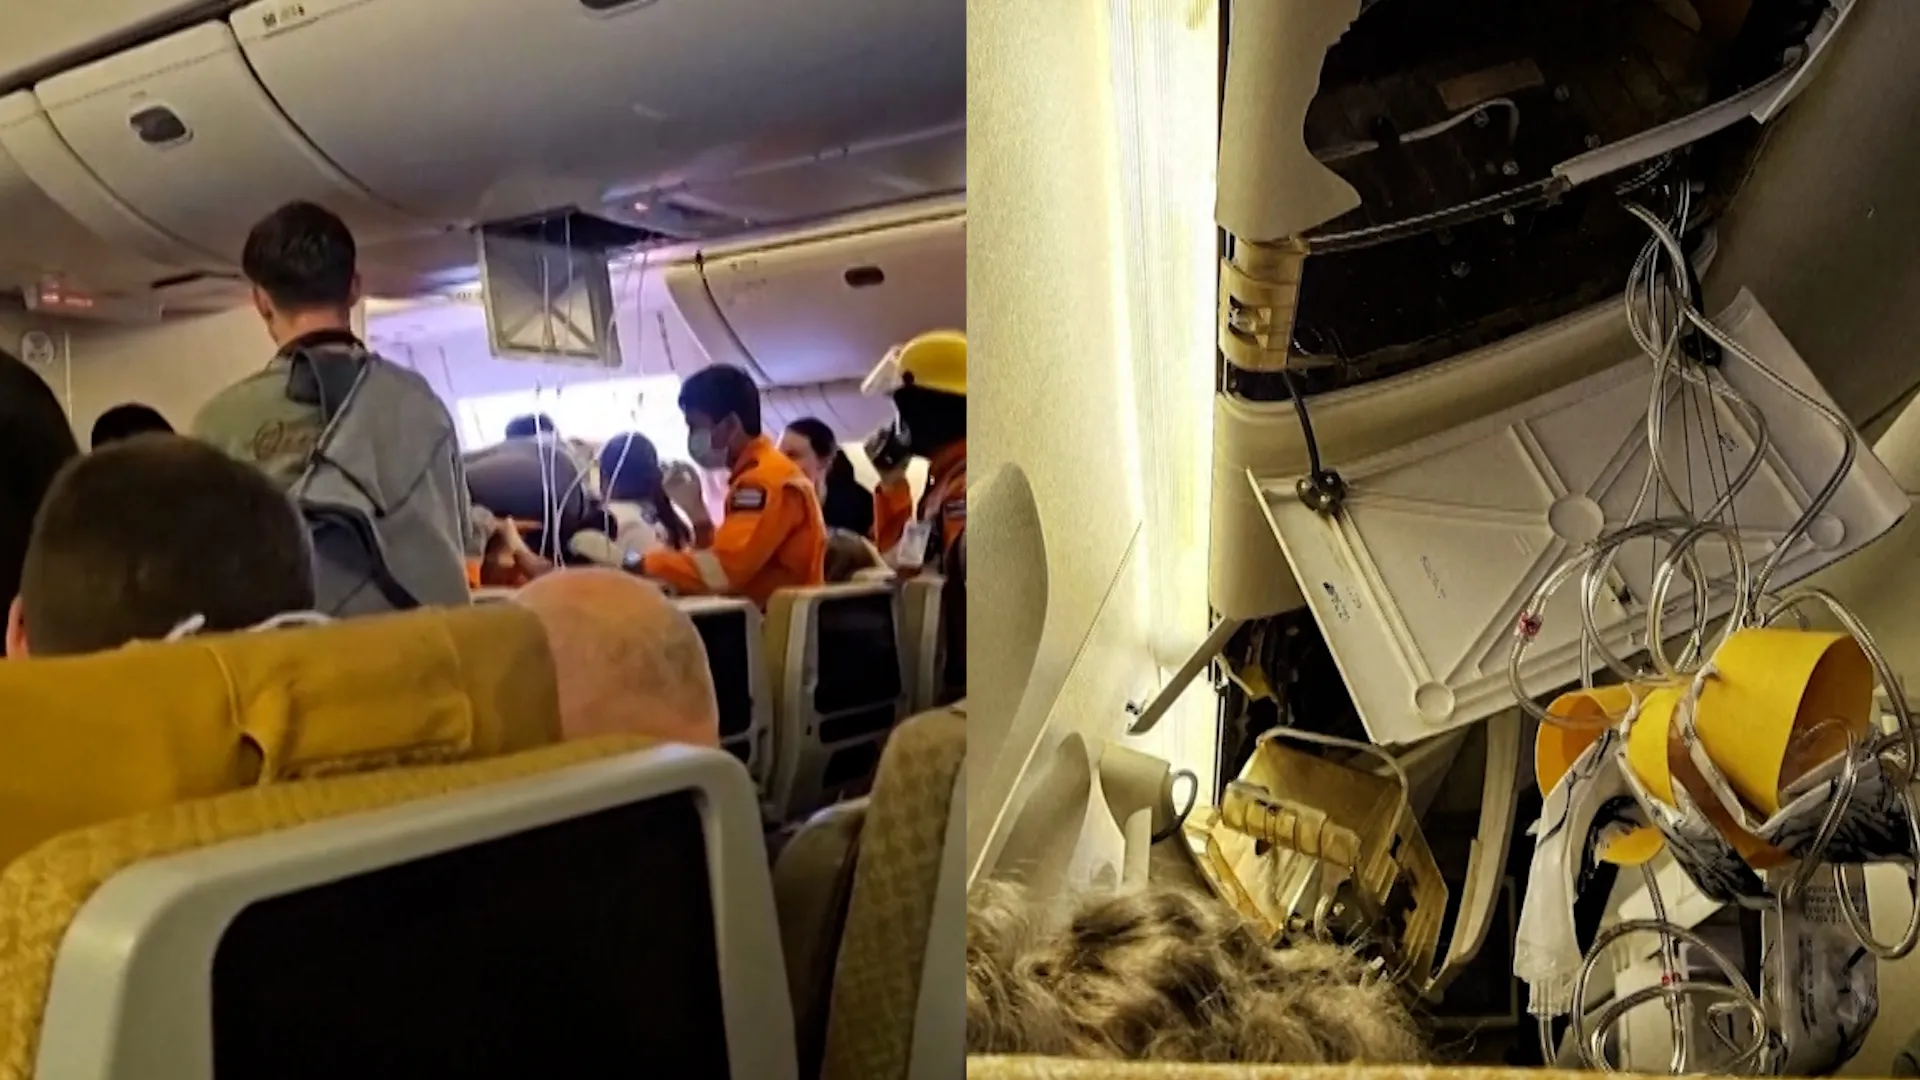 Singapore Airlines flight hits severe turbulence, 1 dead, 30 injured